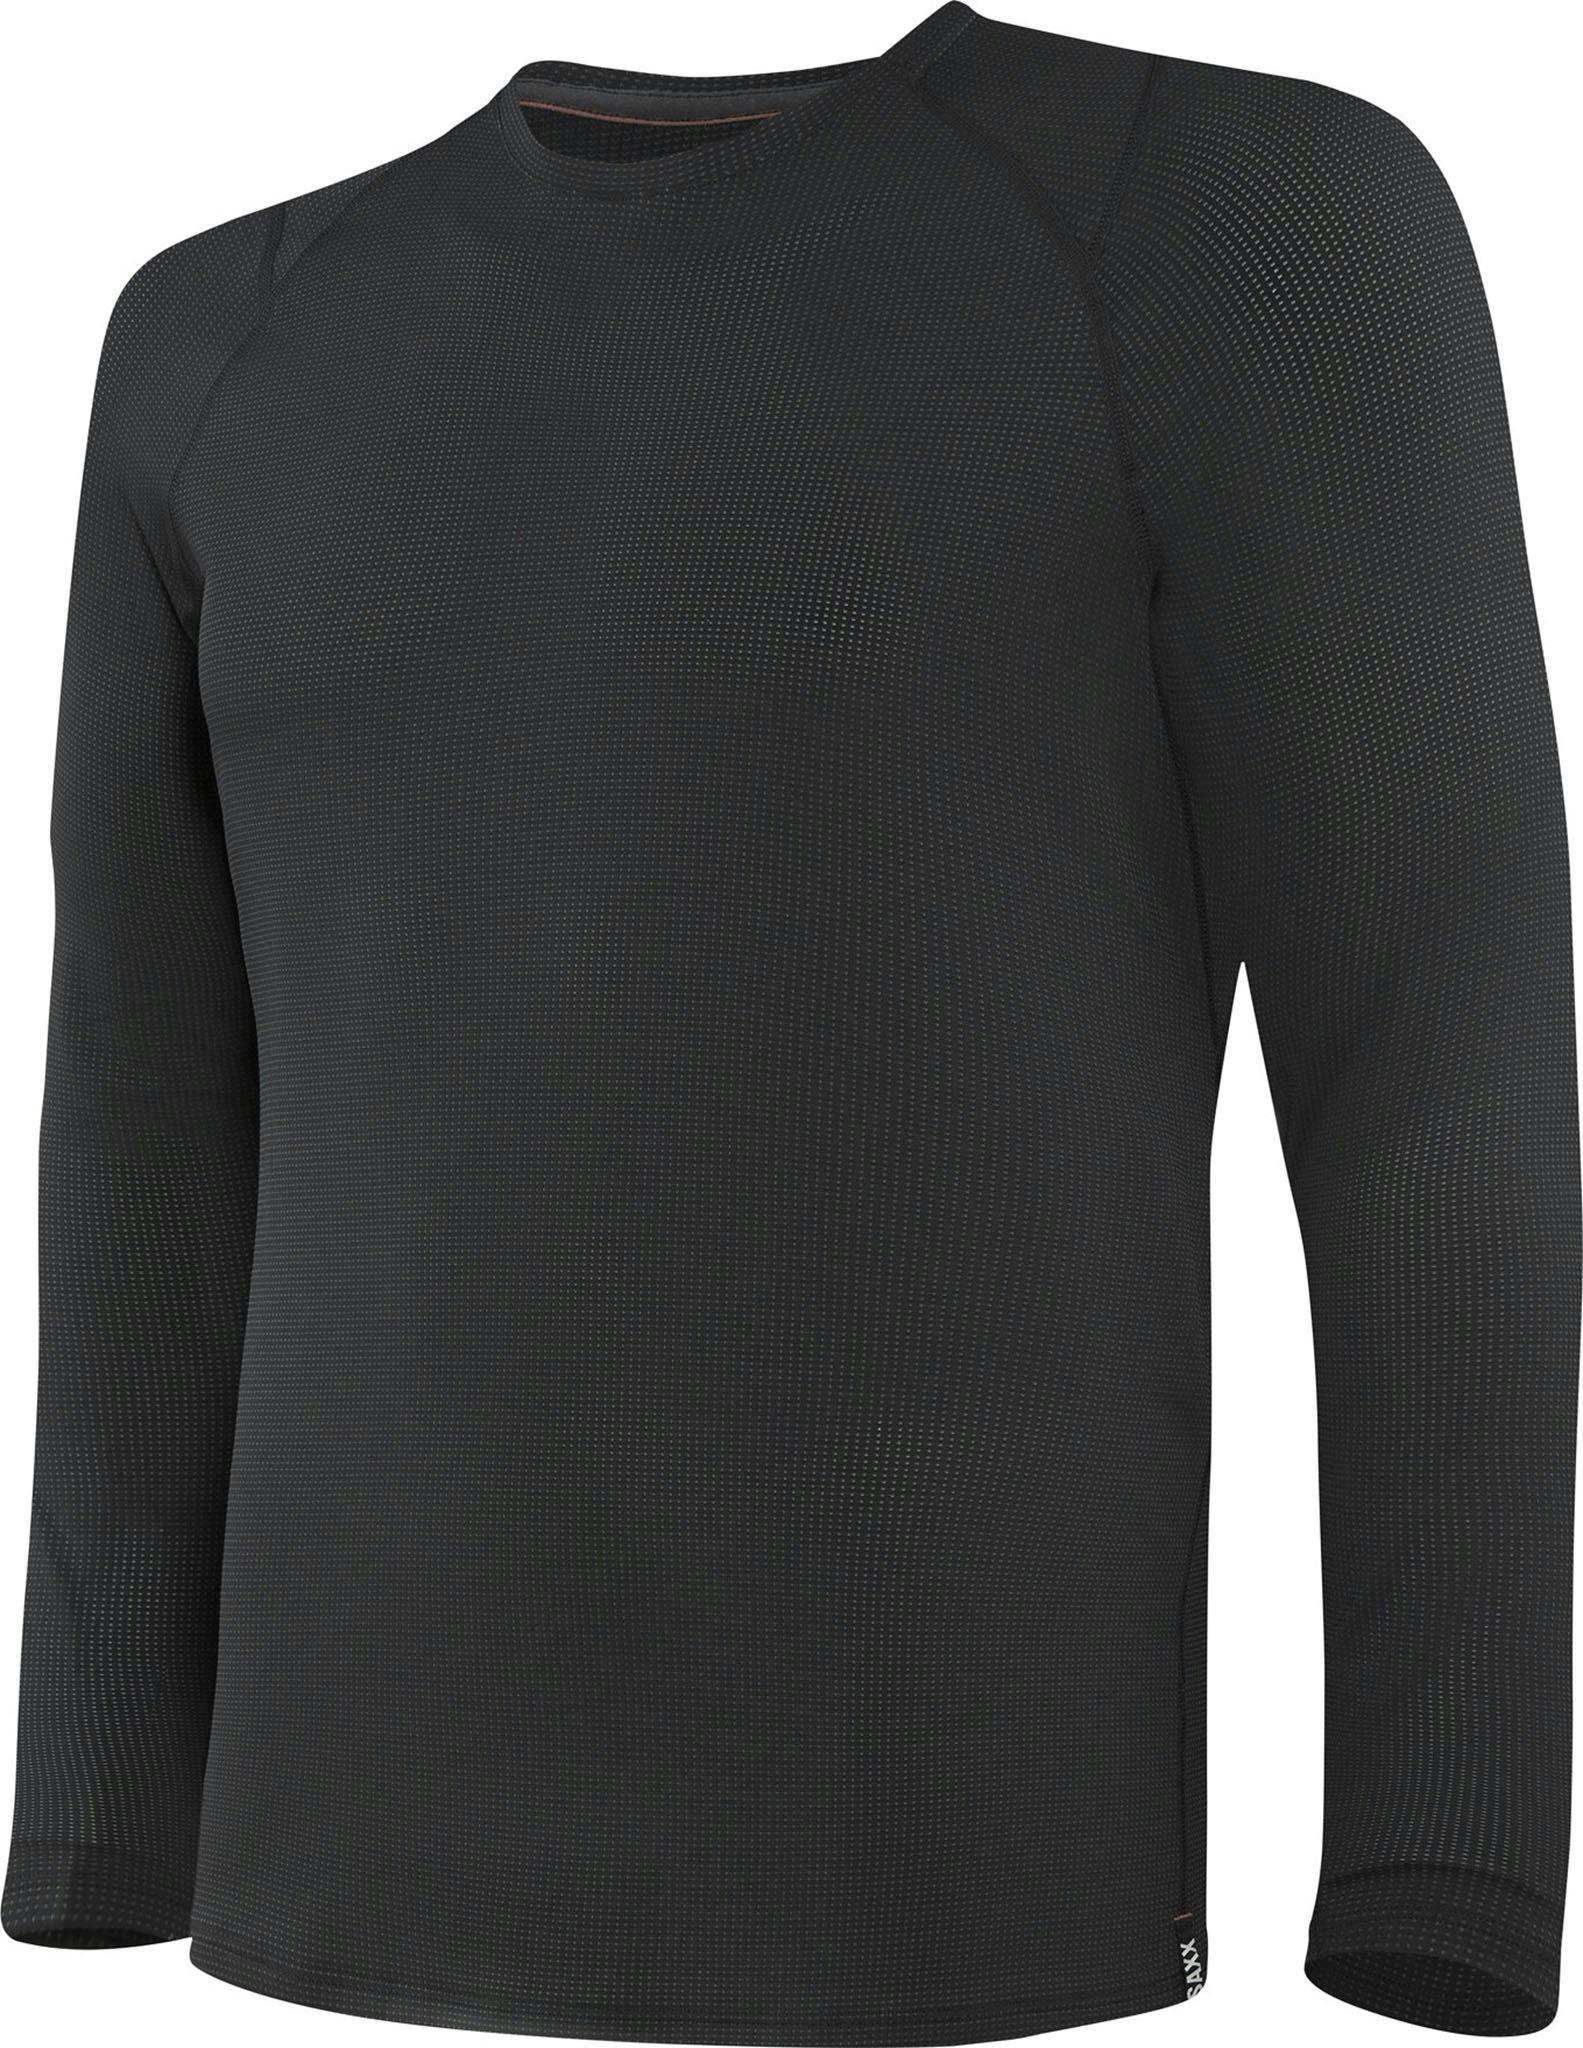 Product image for Quest Long Sleeve Crew - Men's